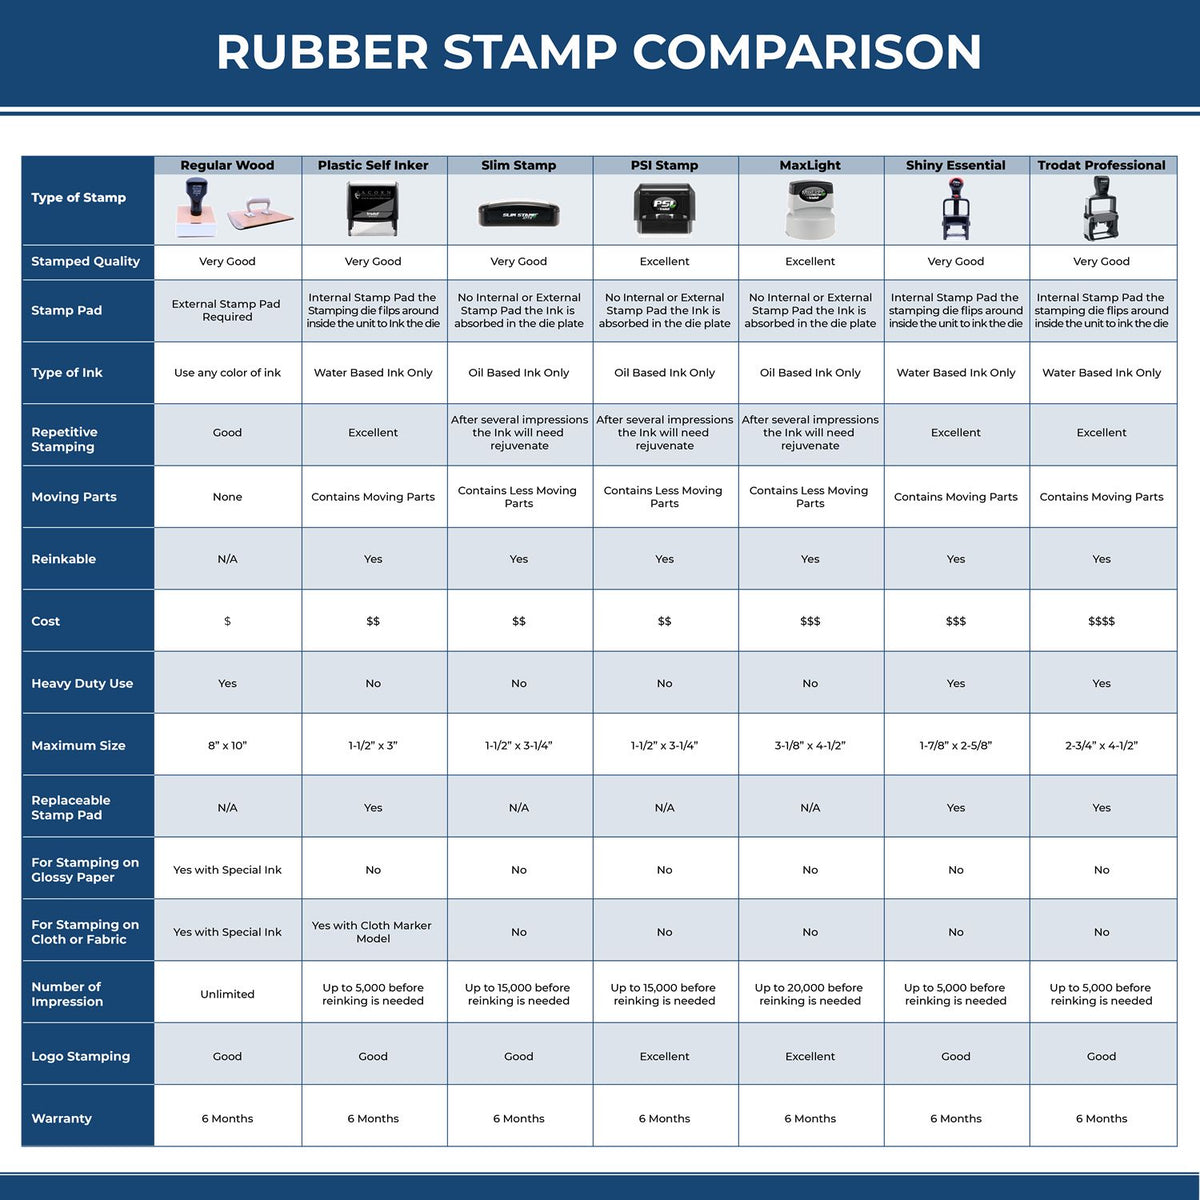 A comparison chart for the different types of mount models available for the Missouri Professional Engineer Seal Stamp.